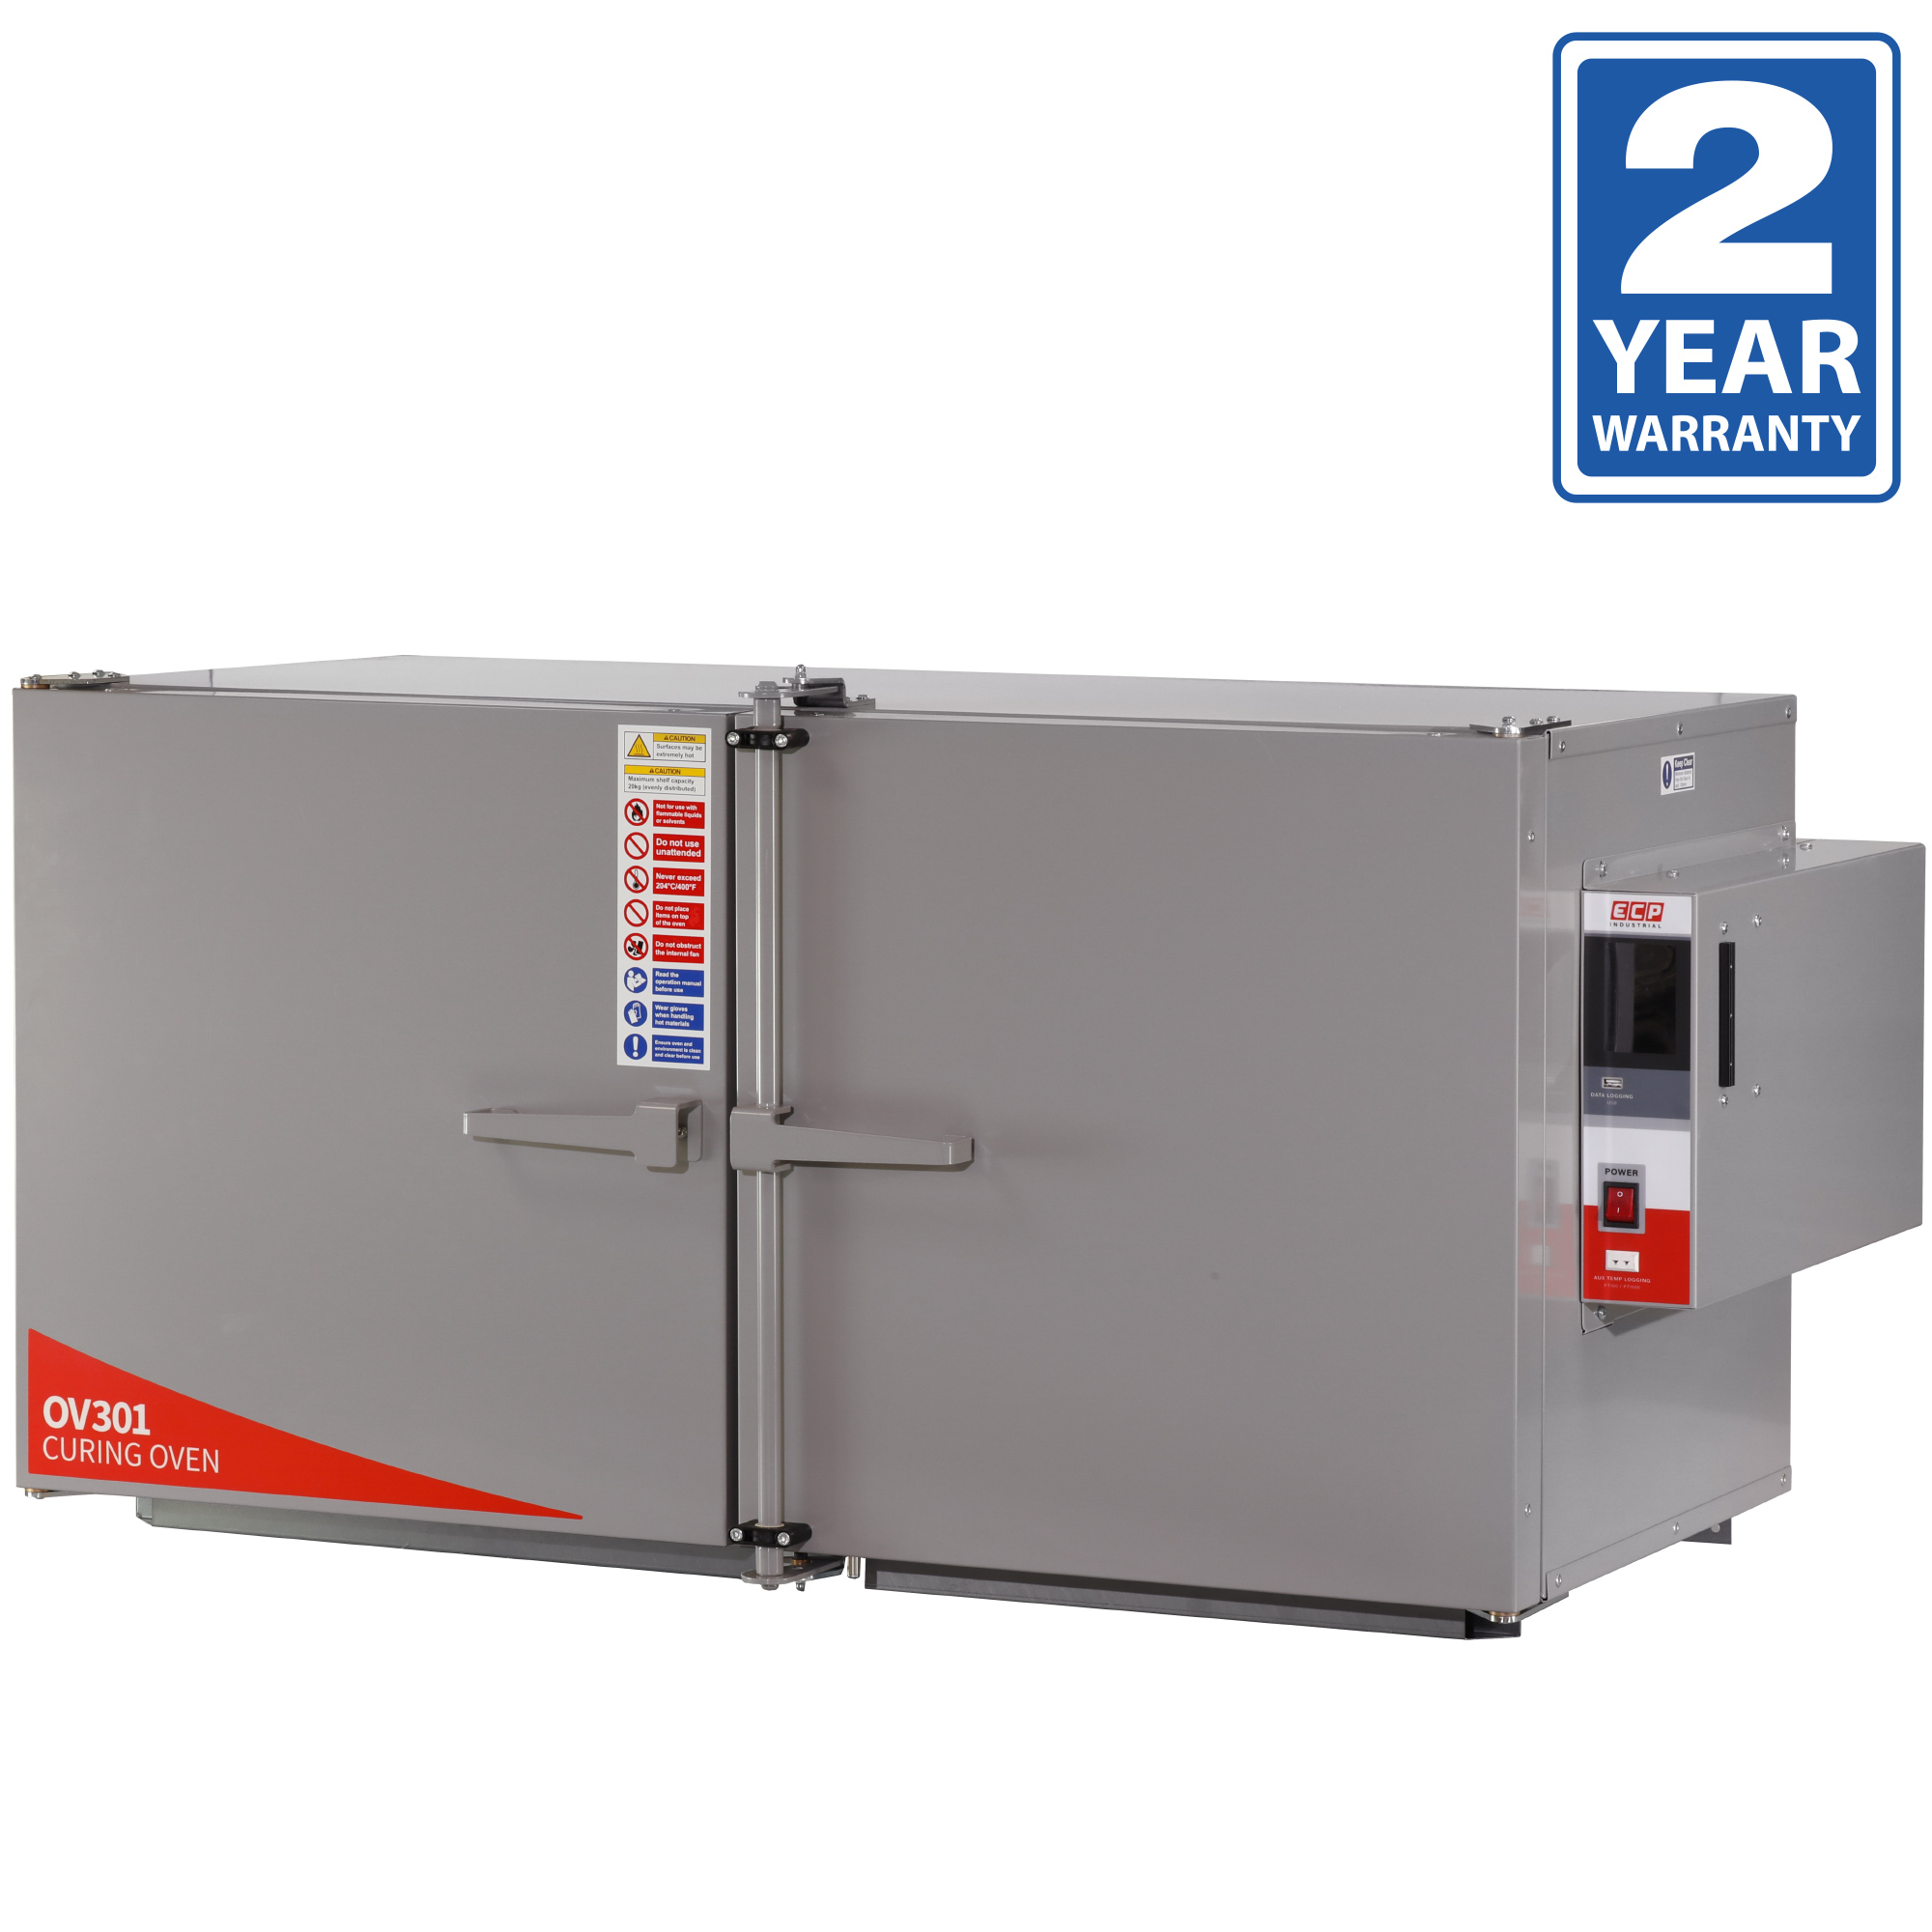 OV301 Precision Benchtop Curing Oven - Easy Composites